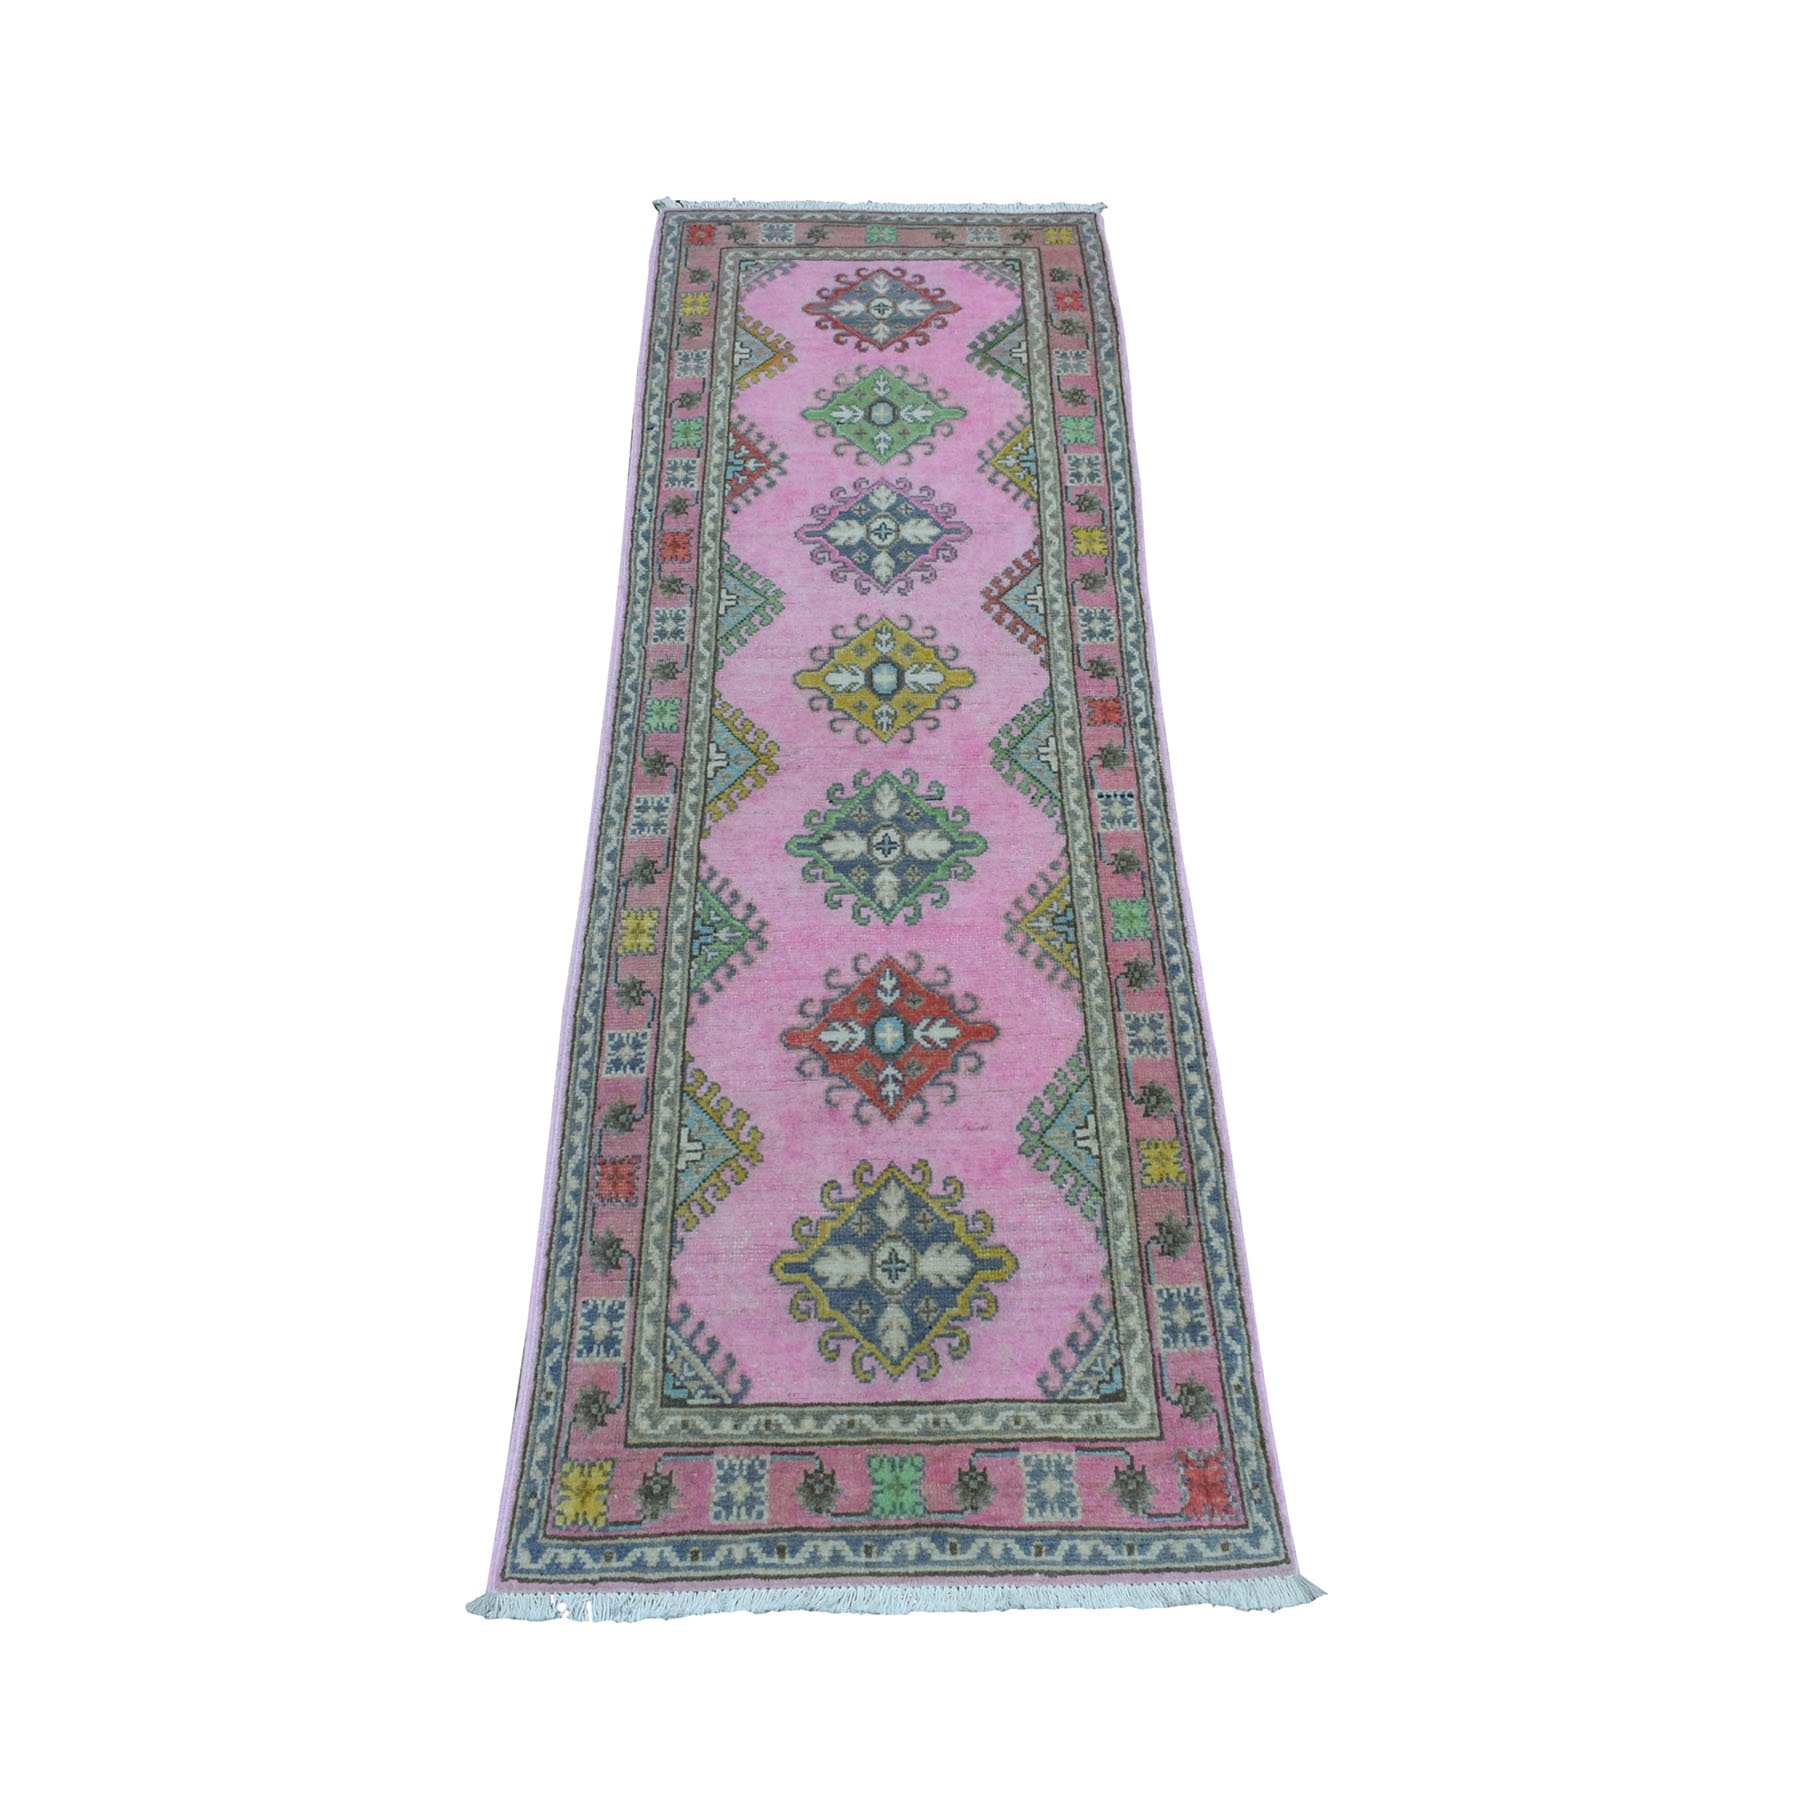 2'X6'1" Colorful Pink Fusion Kazak Pure Wool Geometric Design Runner Hand Knotted Oriental Rug moaedb77